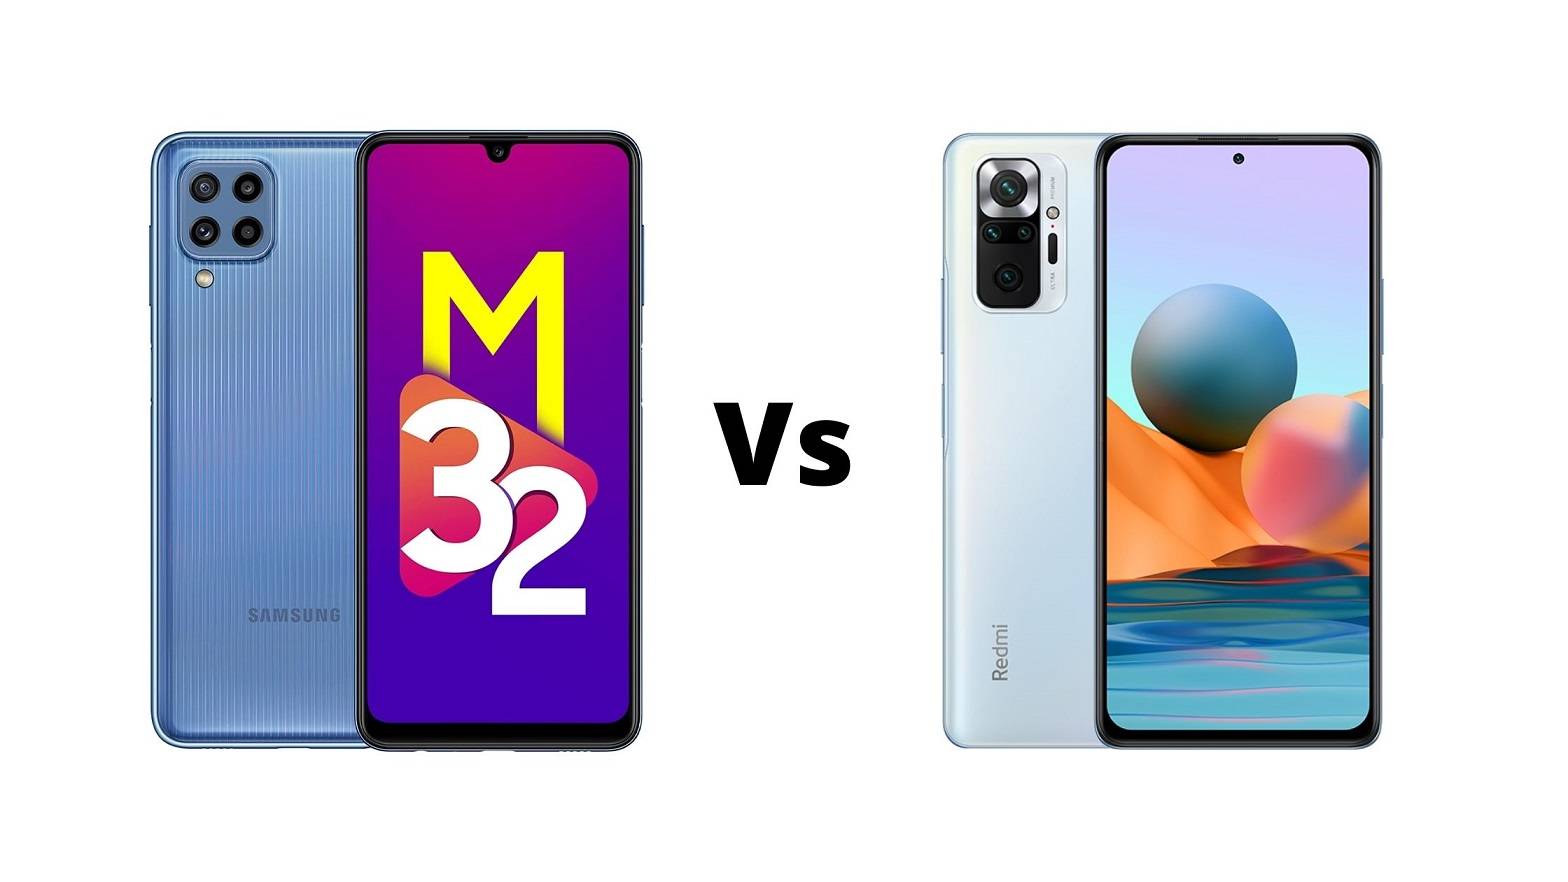 Samsung Galaxy M32 Vs Redmi Note 10 Pro Which one should you buy